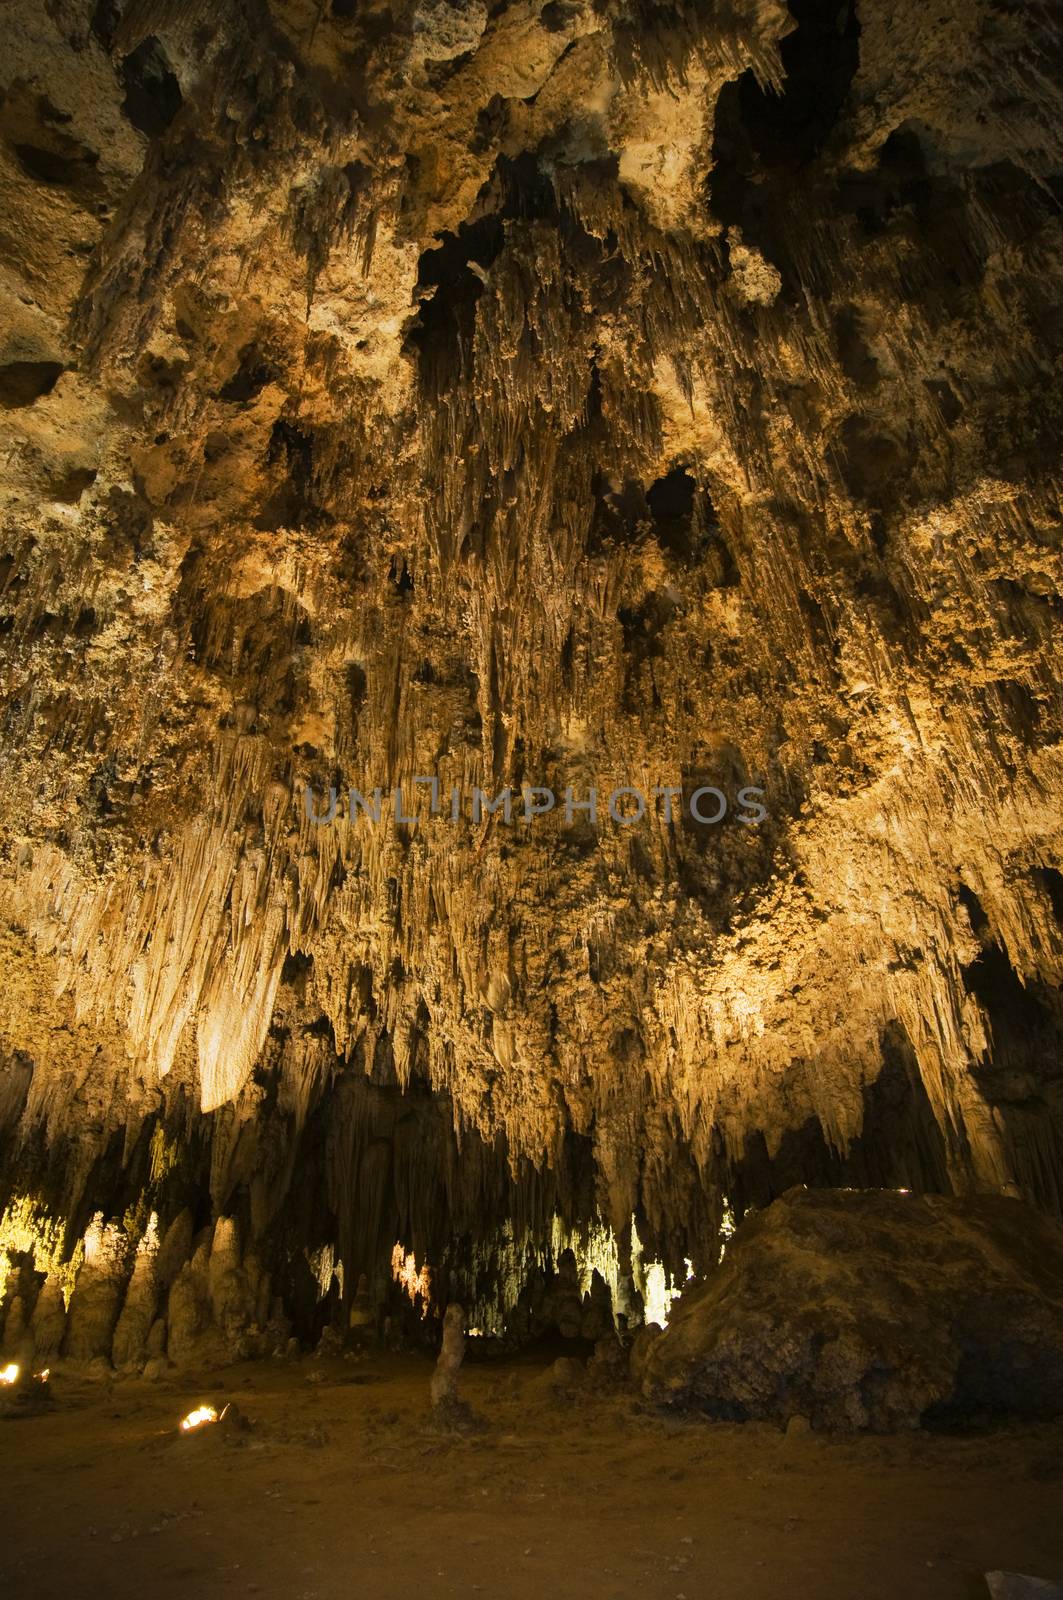 King's Palace in Carlsbad Caverns, NM by Njean